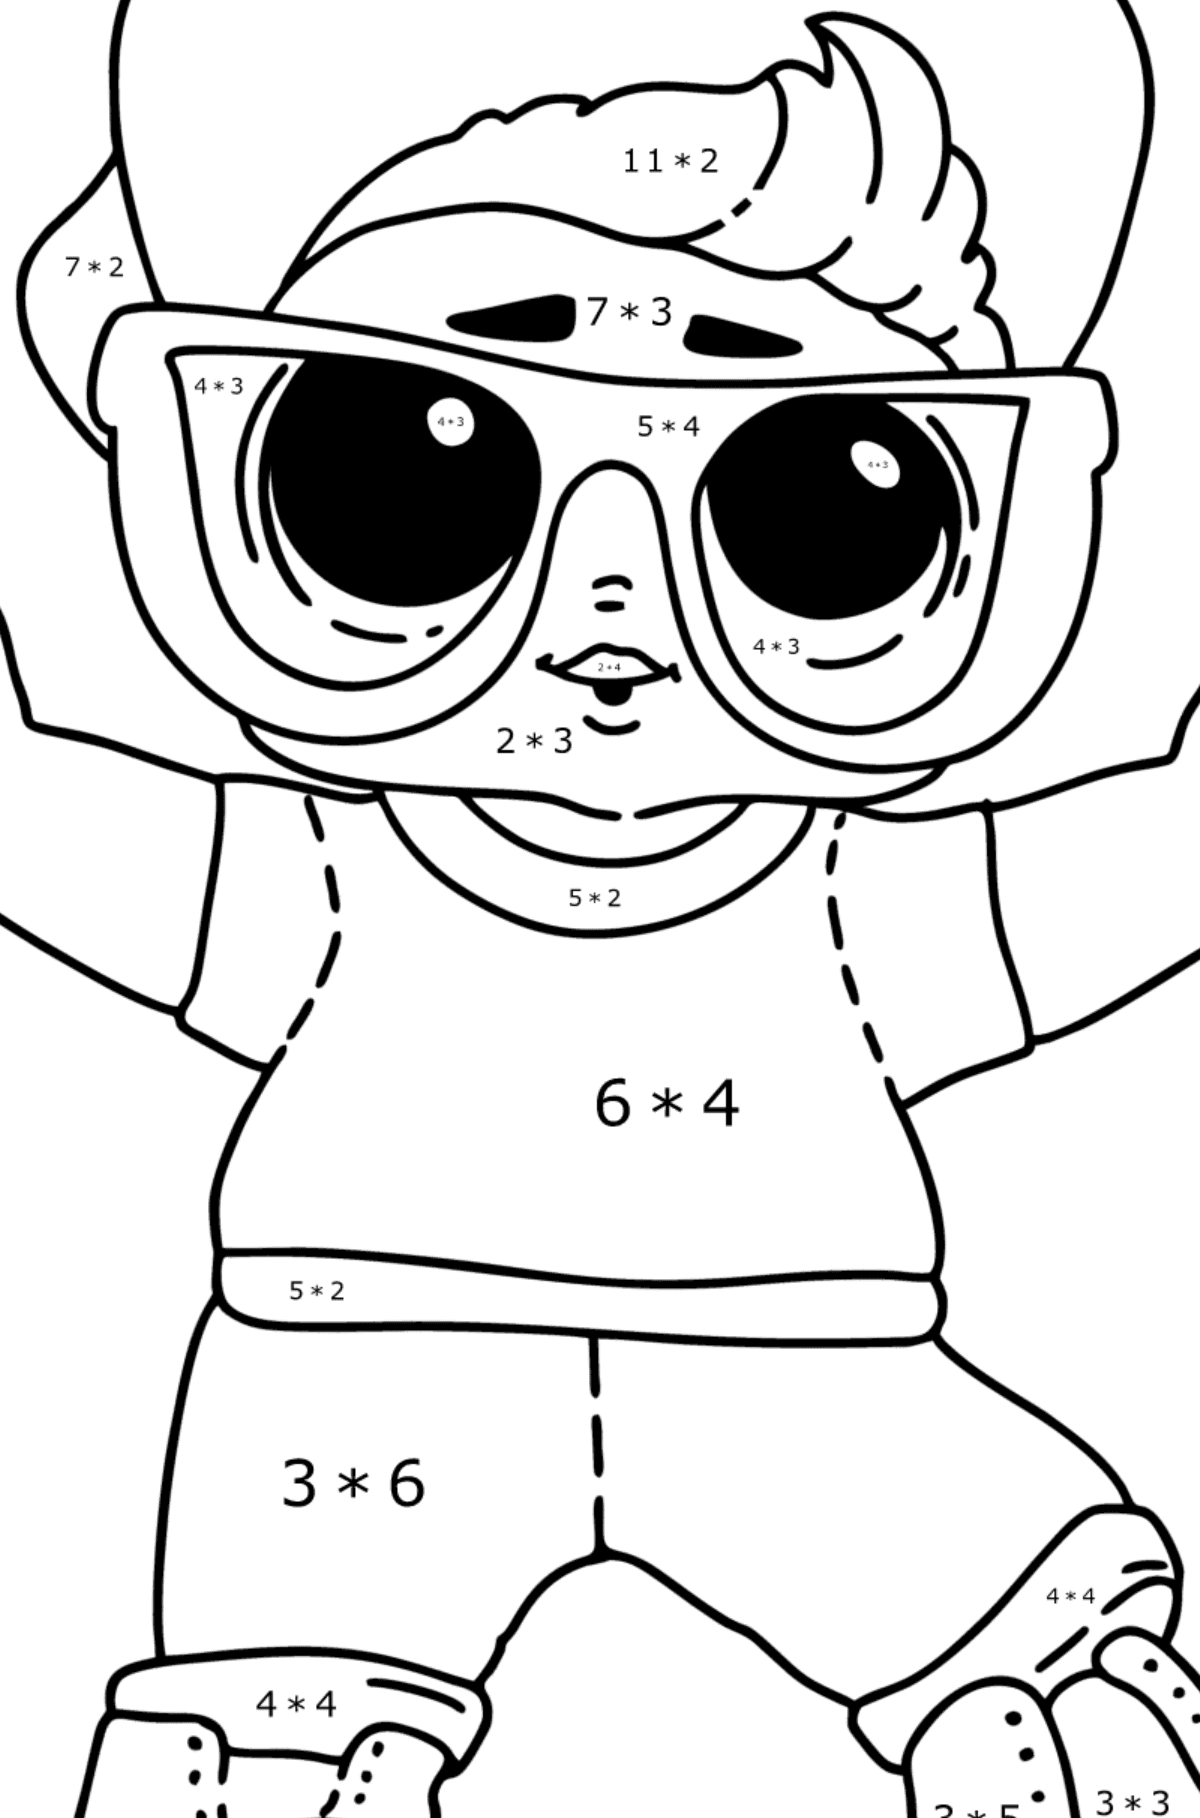 Coloring page LOL boy Next Door - Math Coloring - Multiplication for Kids